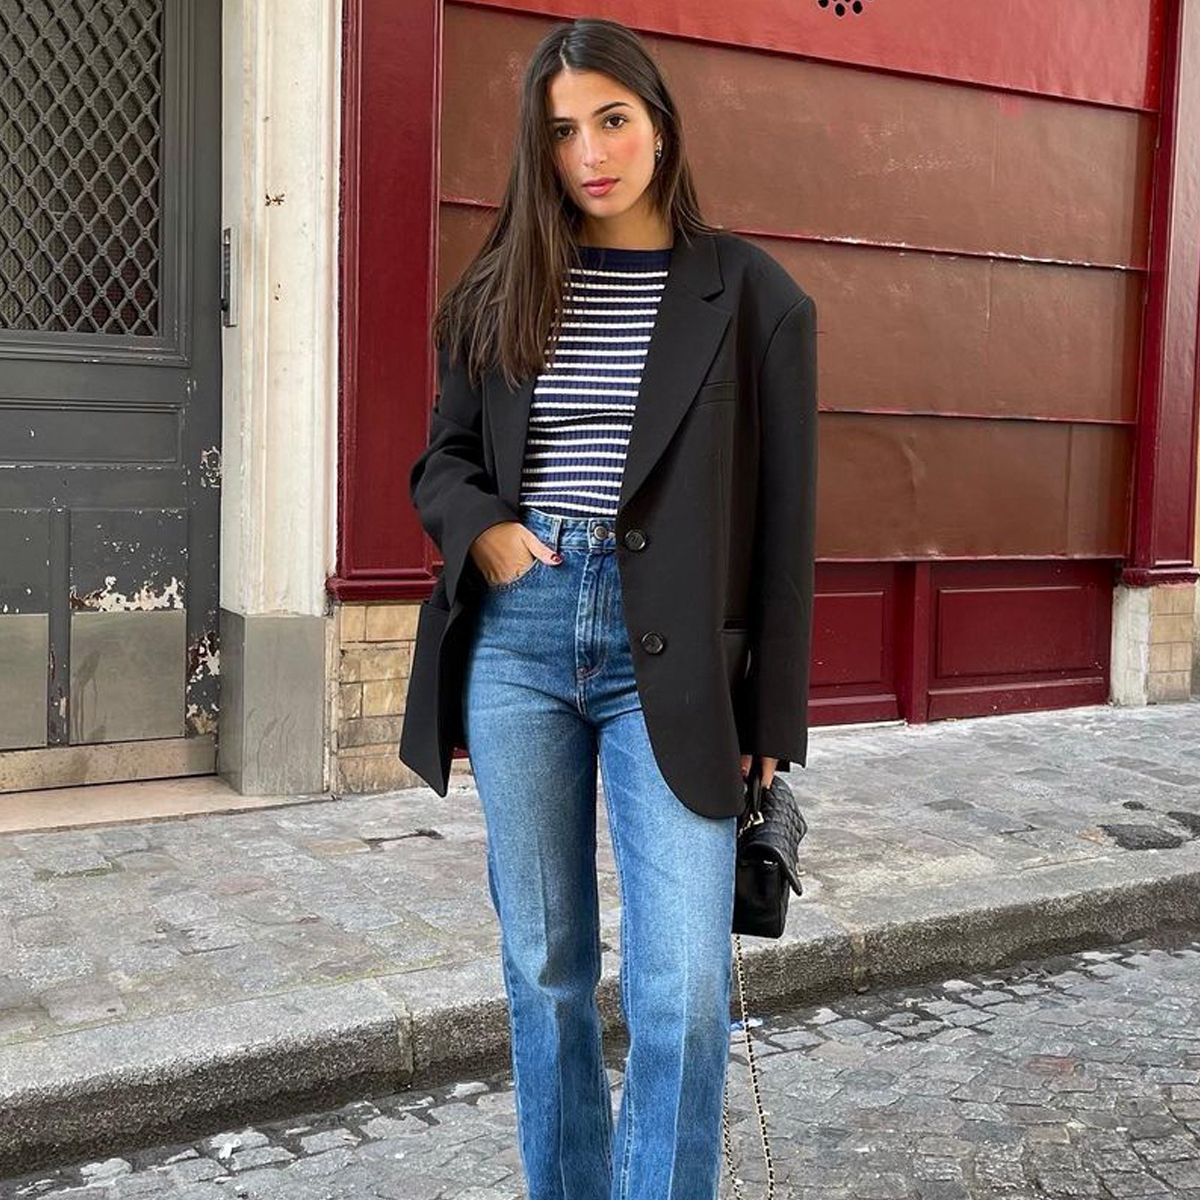 10 Timeless Items French Women Have in Their Capsule Wardrobes